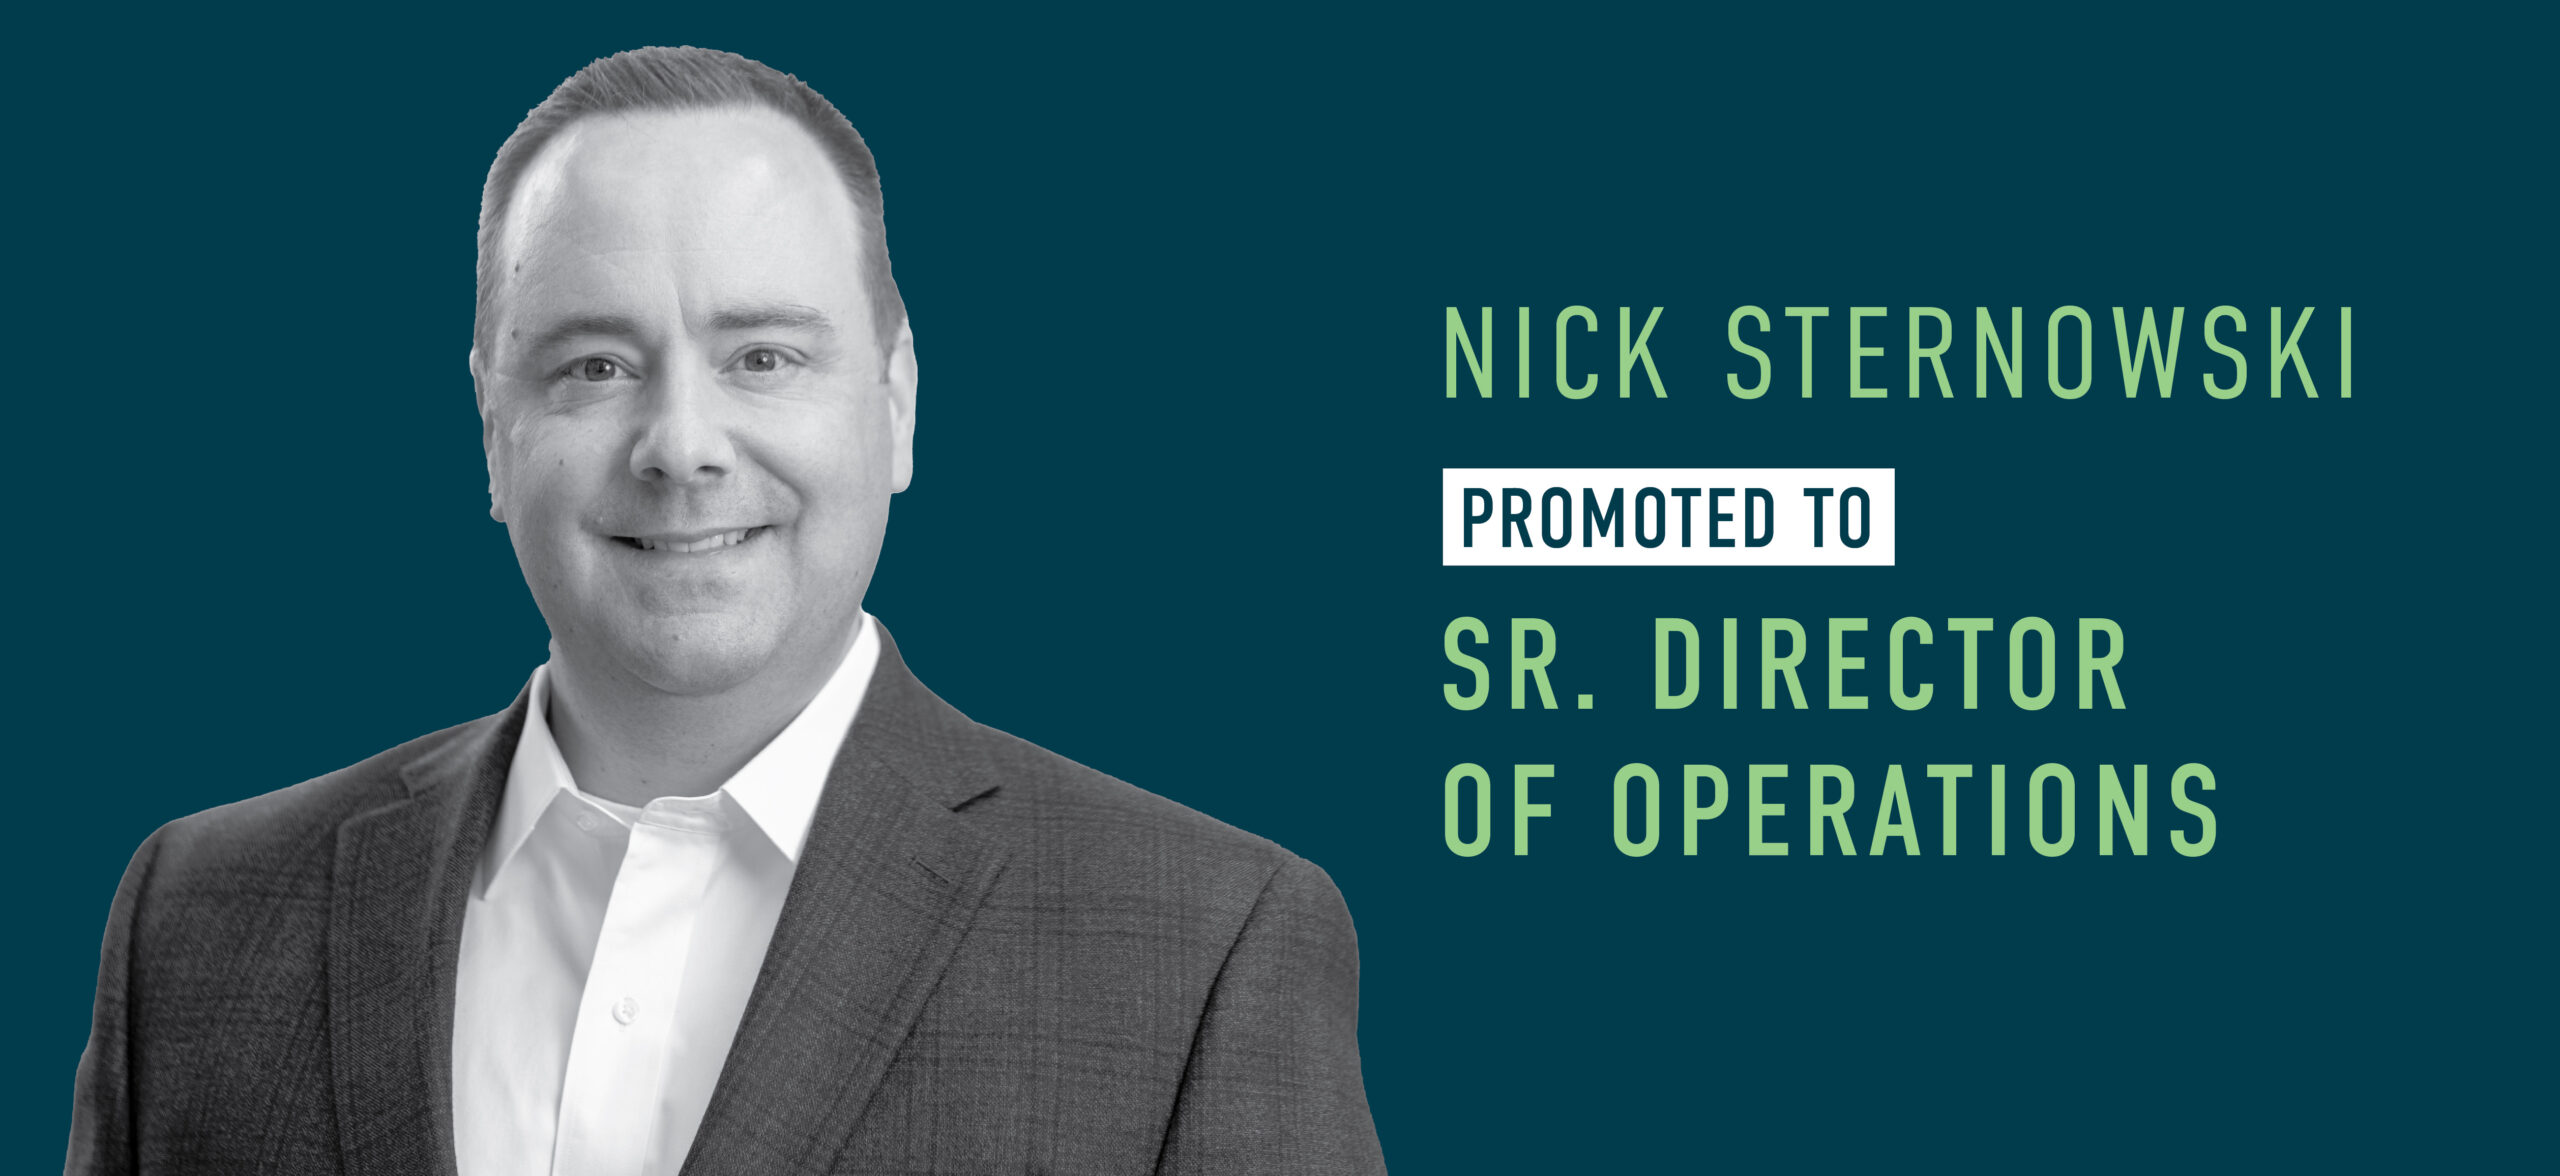 Nick Sternowski Promoted to Sr. Director of Operations